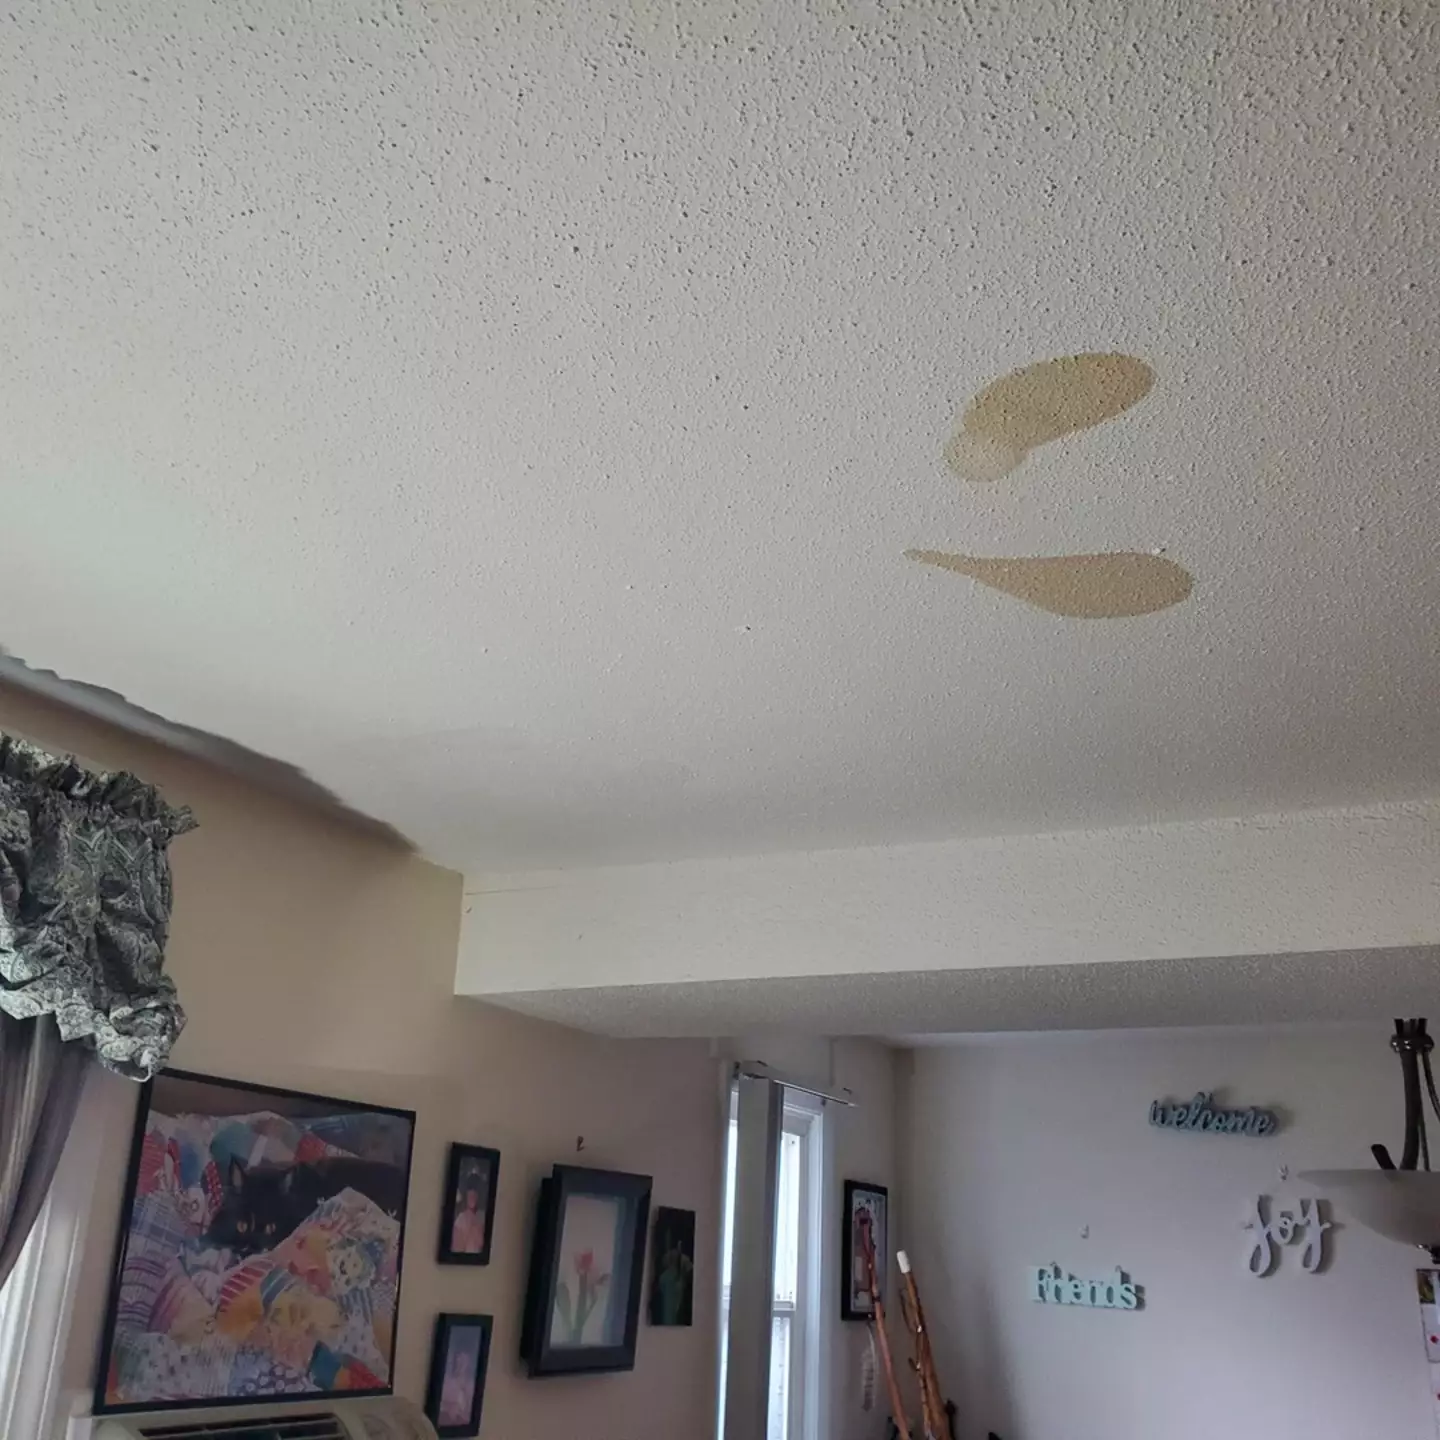 One woman was left disgusted after finally figuring out what the brown stains on her apartment ceiling were.